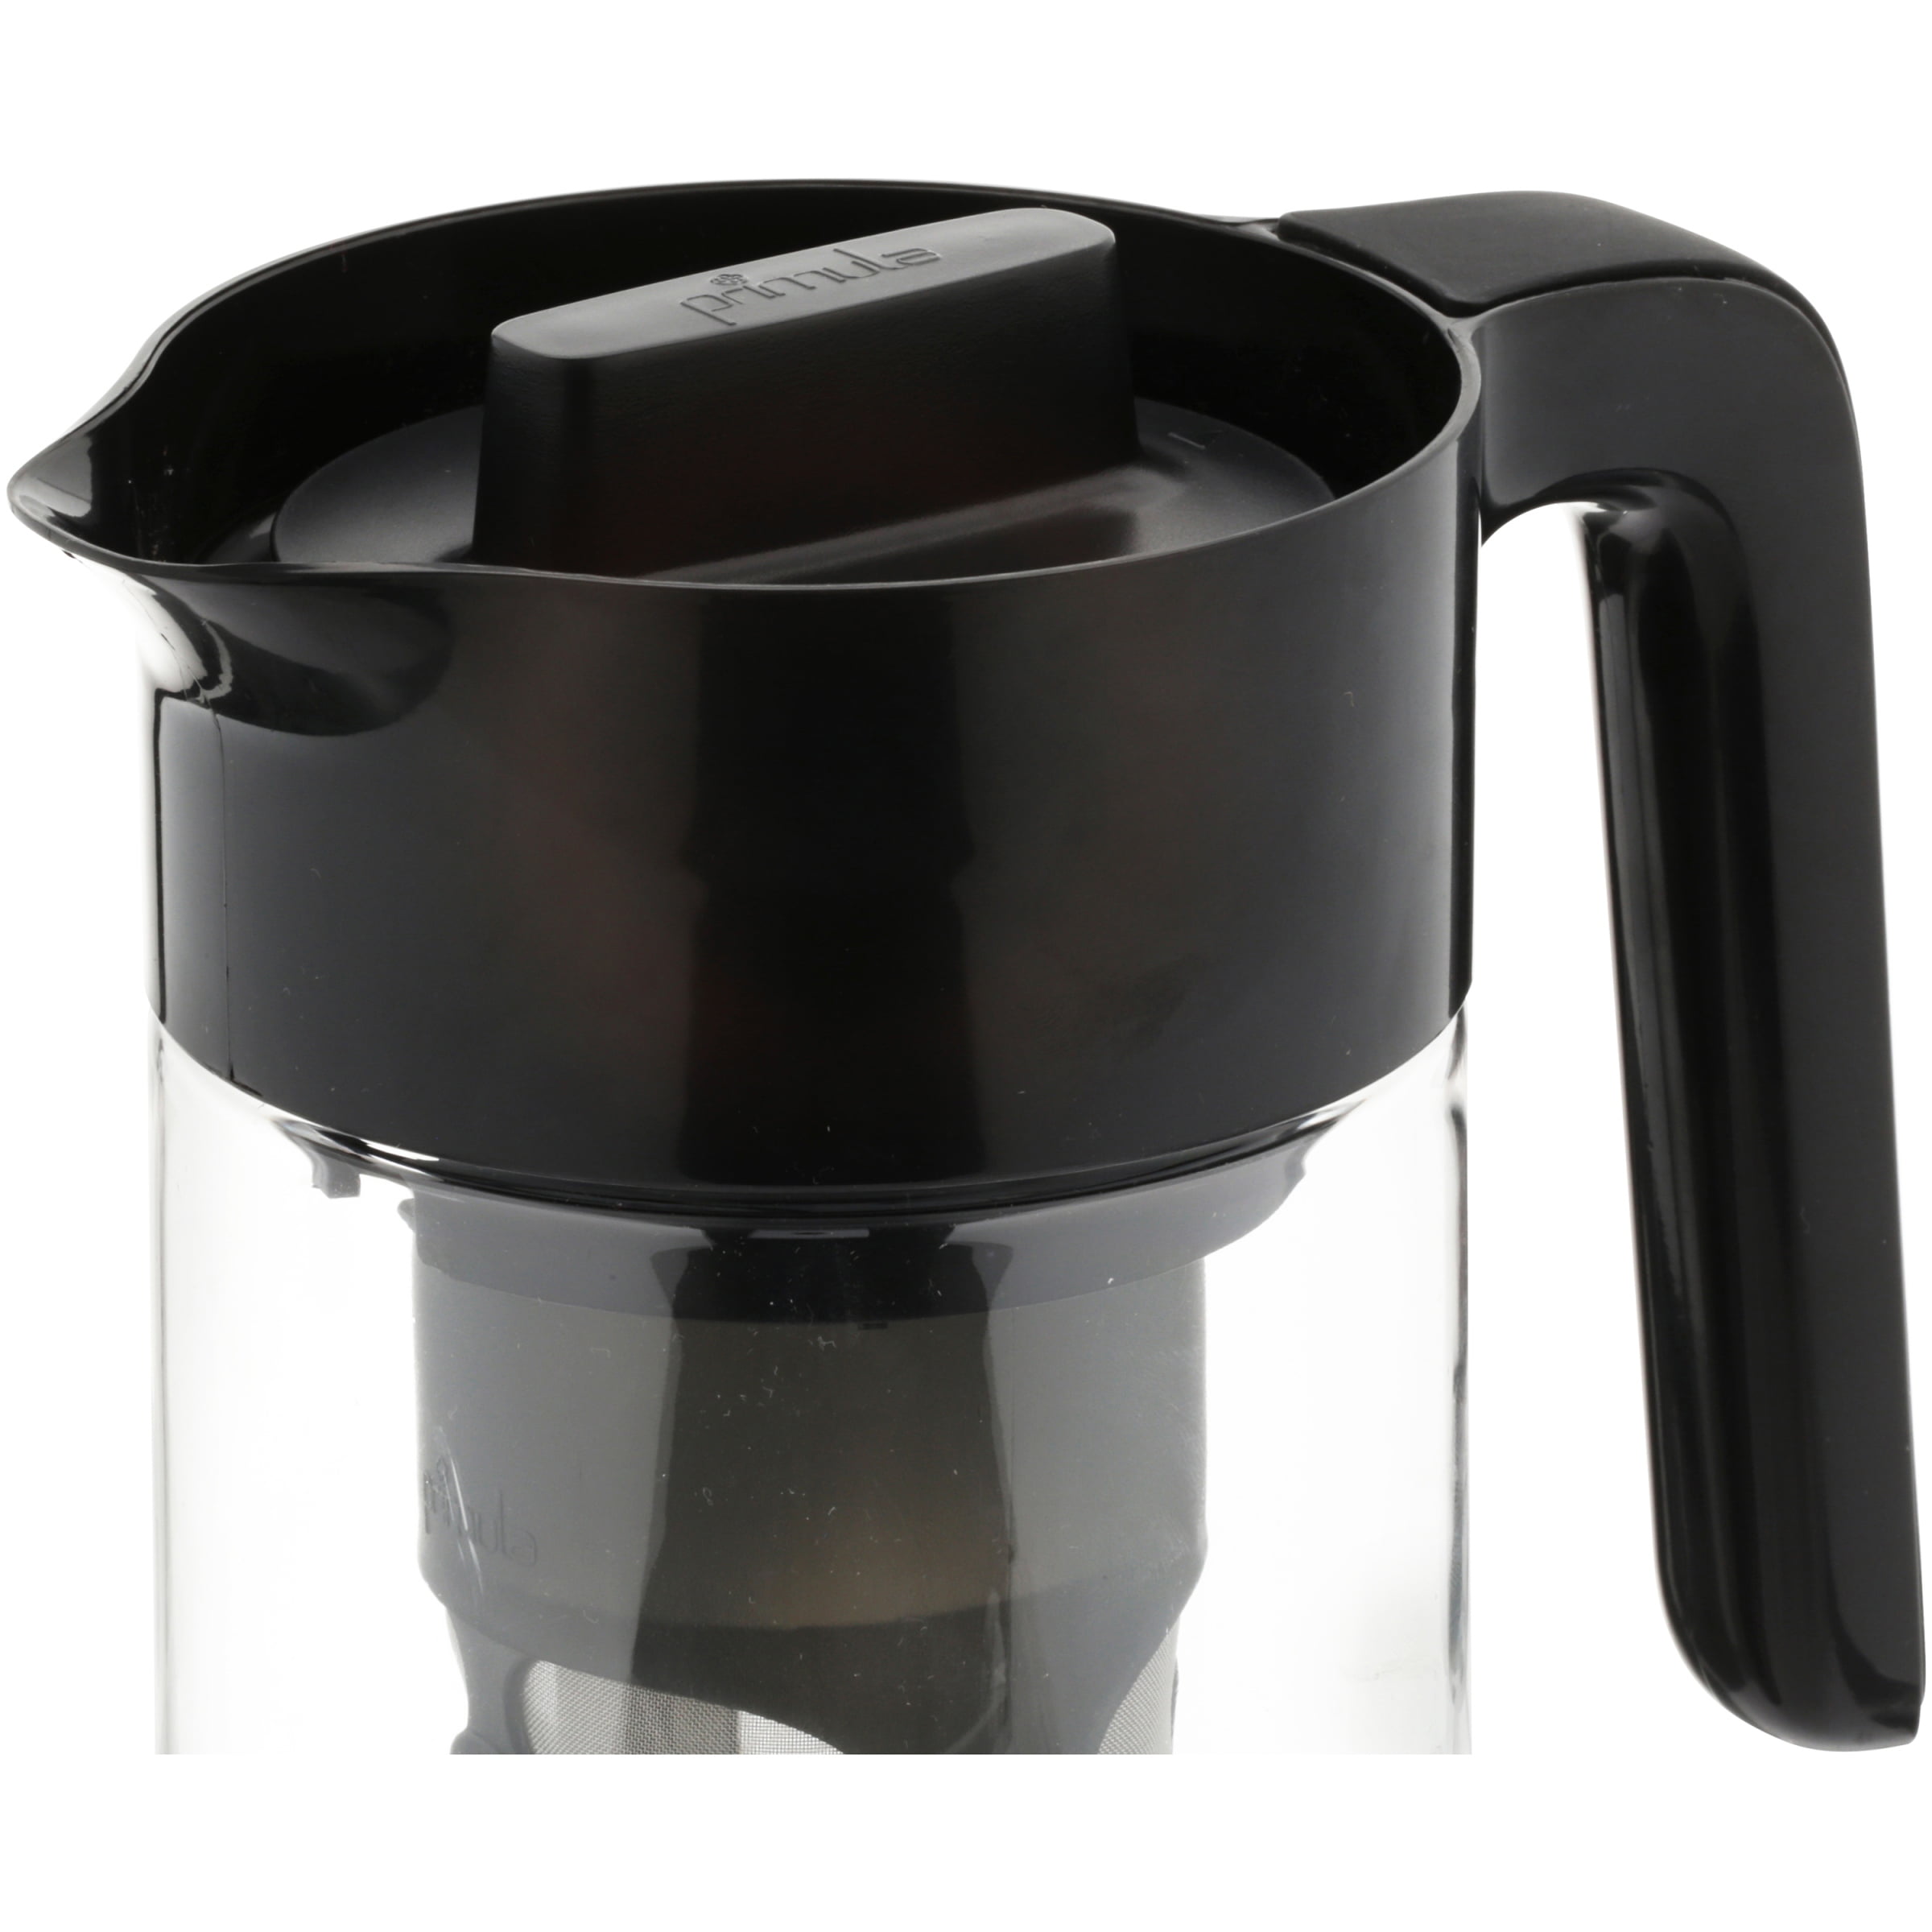 Primula Pace Cold Brew Coffee Maker : Target